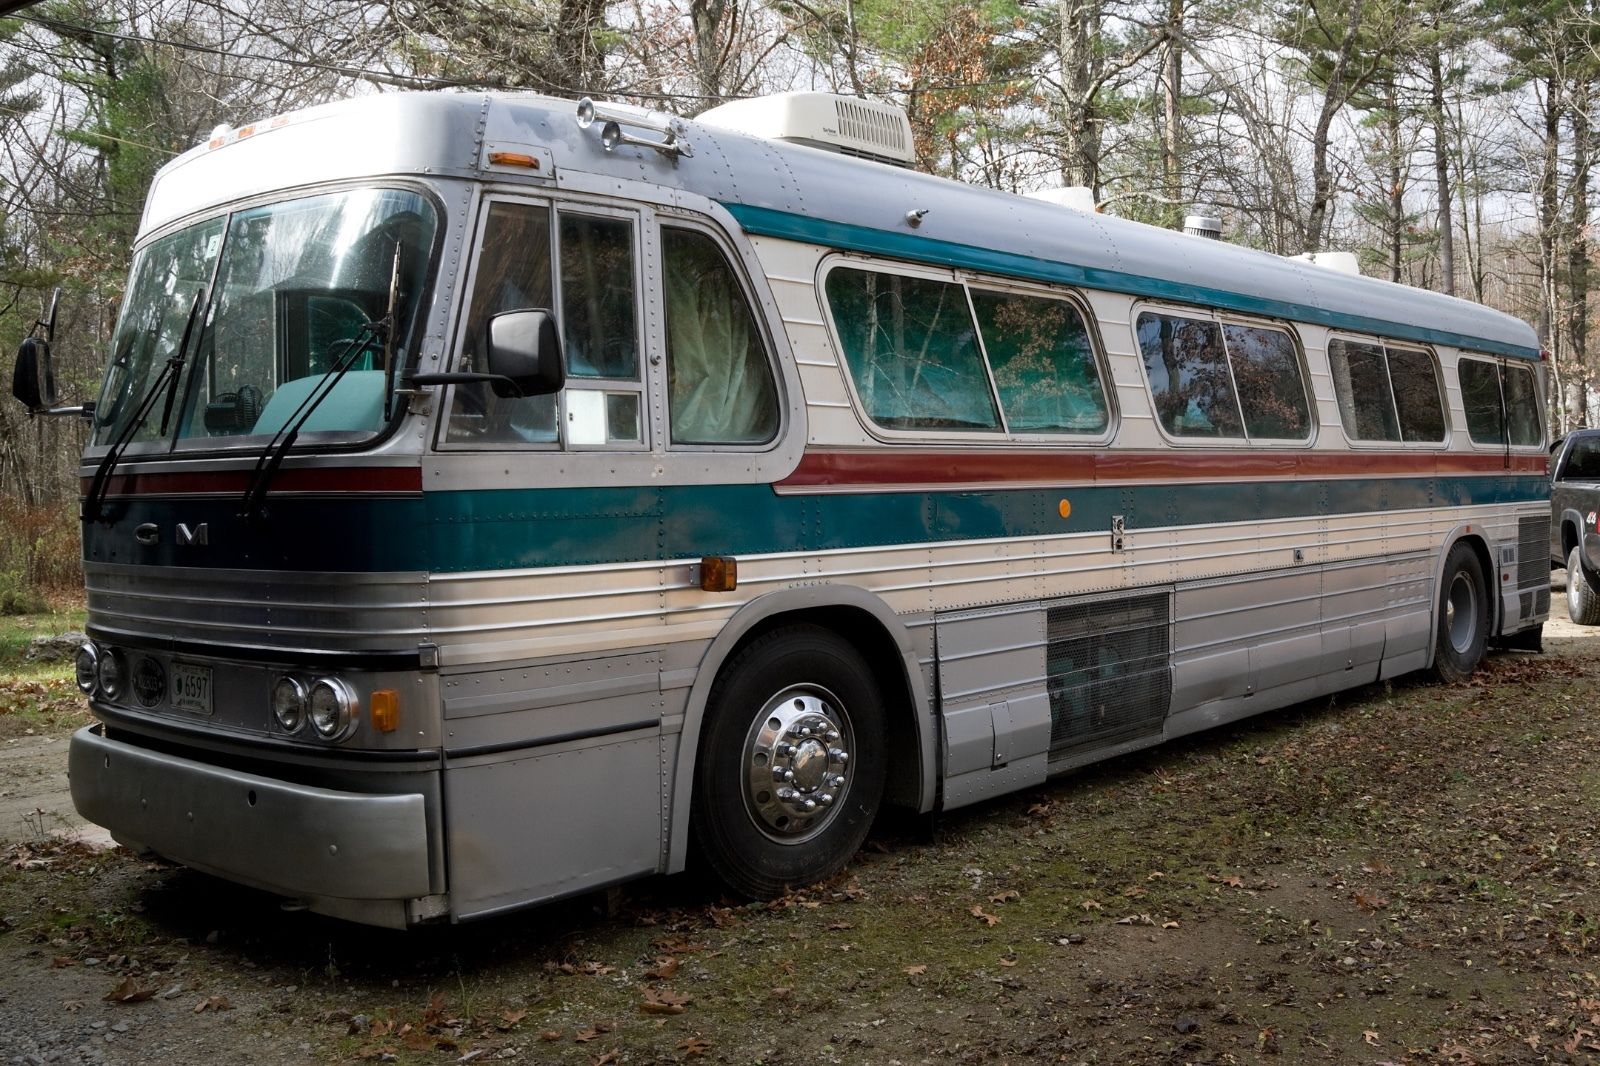 Converted bus 1962 GM 4106 camper for sale